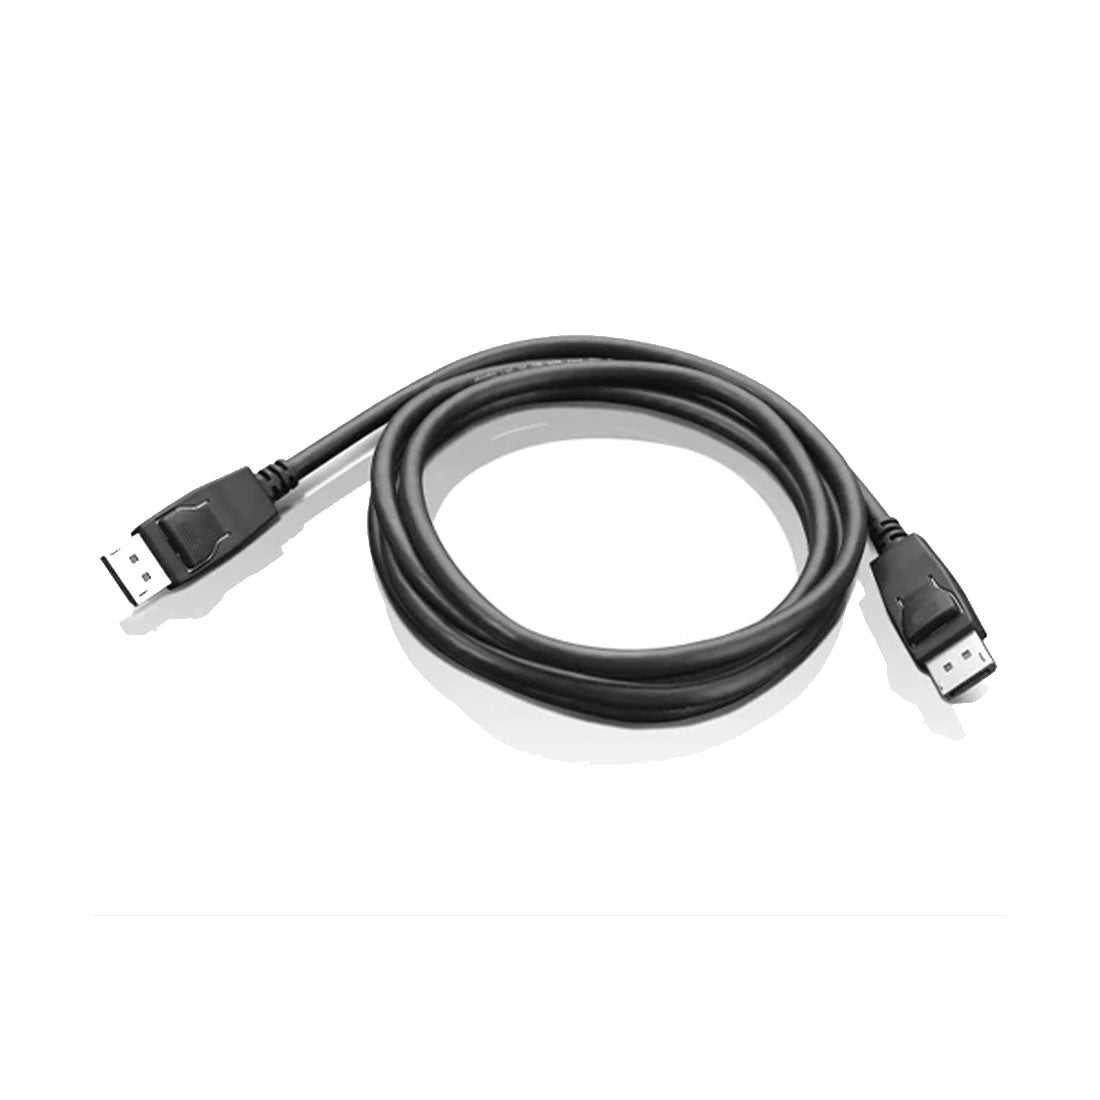 Lenovo DisplayPort to DisplayPort Cable with Resolution of up to 4K x 2K Displays